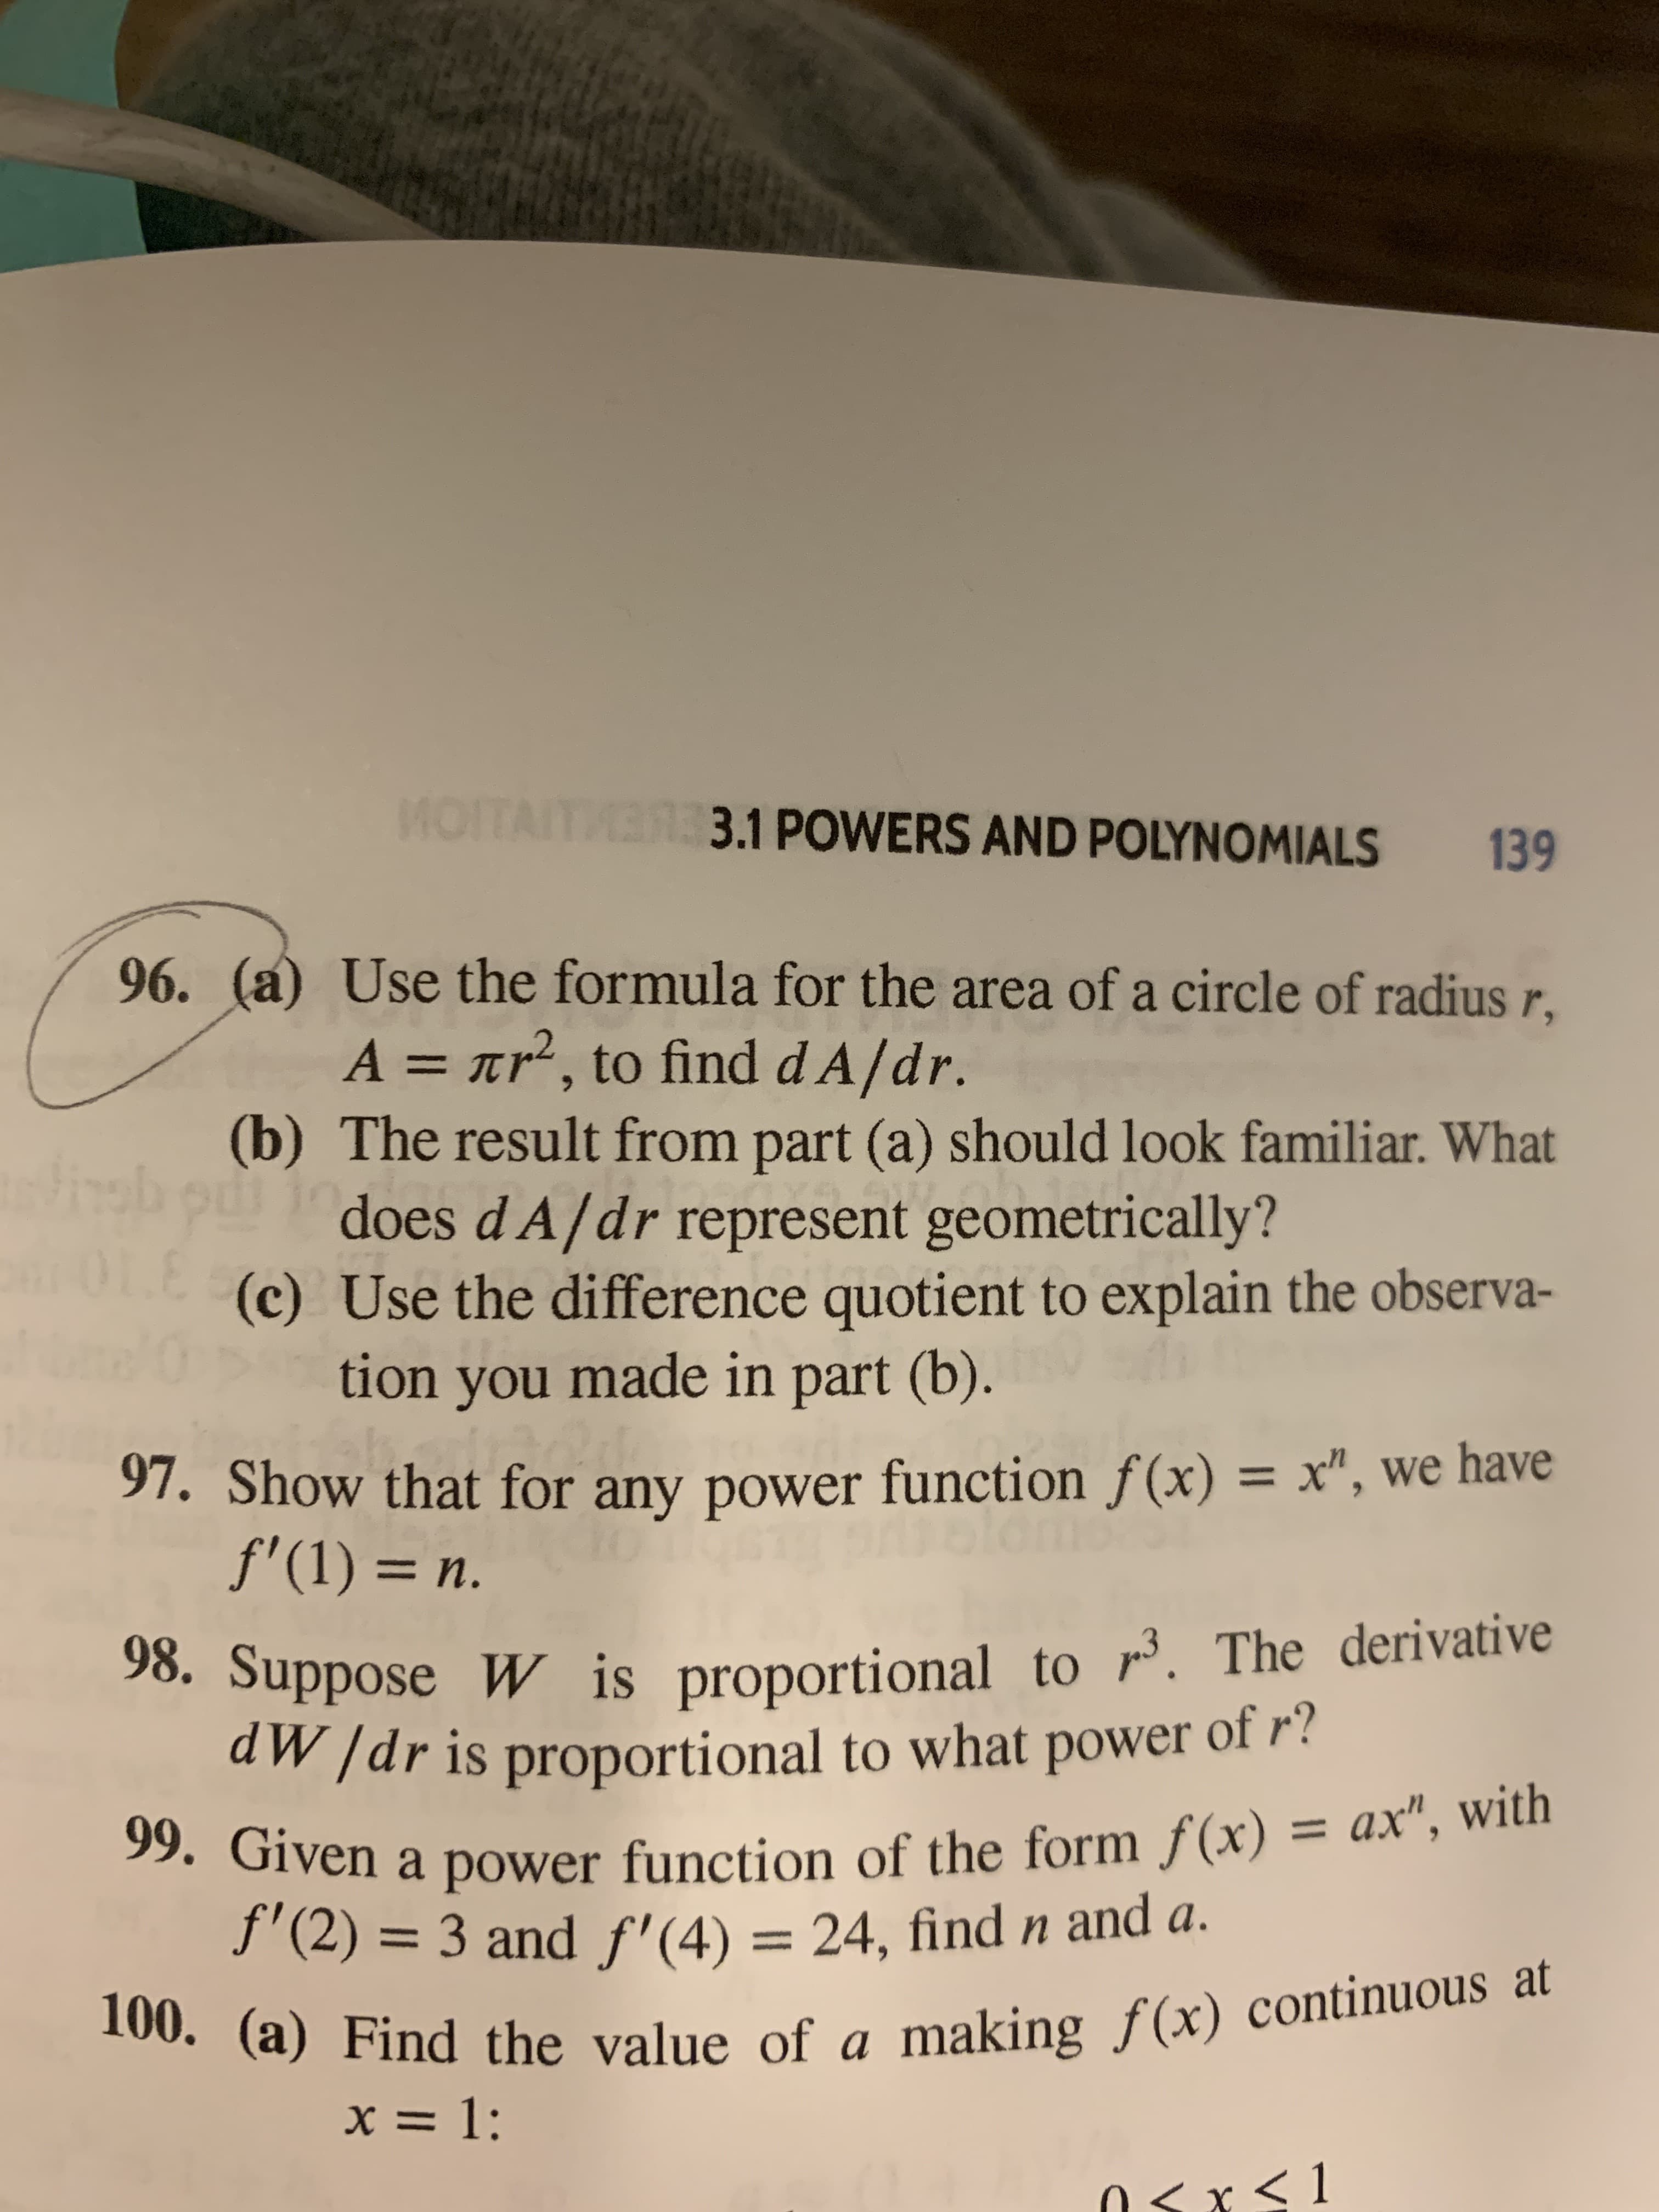 MOTA
31POWERS AND POLYNOMIALS
139
96. (a) Use the formula for the area of a circle of radius r
A nr2, to find dA/dr.
(b) The result from part (a) should look familiar. What
does d A/dr represent geometrically?
L(c) Use the difference quotient to explain the observa-
tion you made in part (b).
97. Show that for any power function f(x) = x", we have
f'(1) n.
98. Suppose W is proportional to r. The derivative
d/dr is proportional to what power of ?
99. Given a power function of the form f(x) = ax", with
f'(2)= 3 and f'(4) = 24, findn and a.
100. (a) Find the value of a making f(x) continuous at
11
x= 1:
